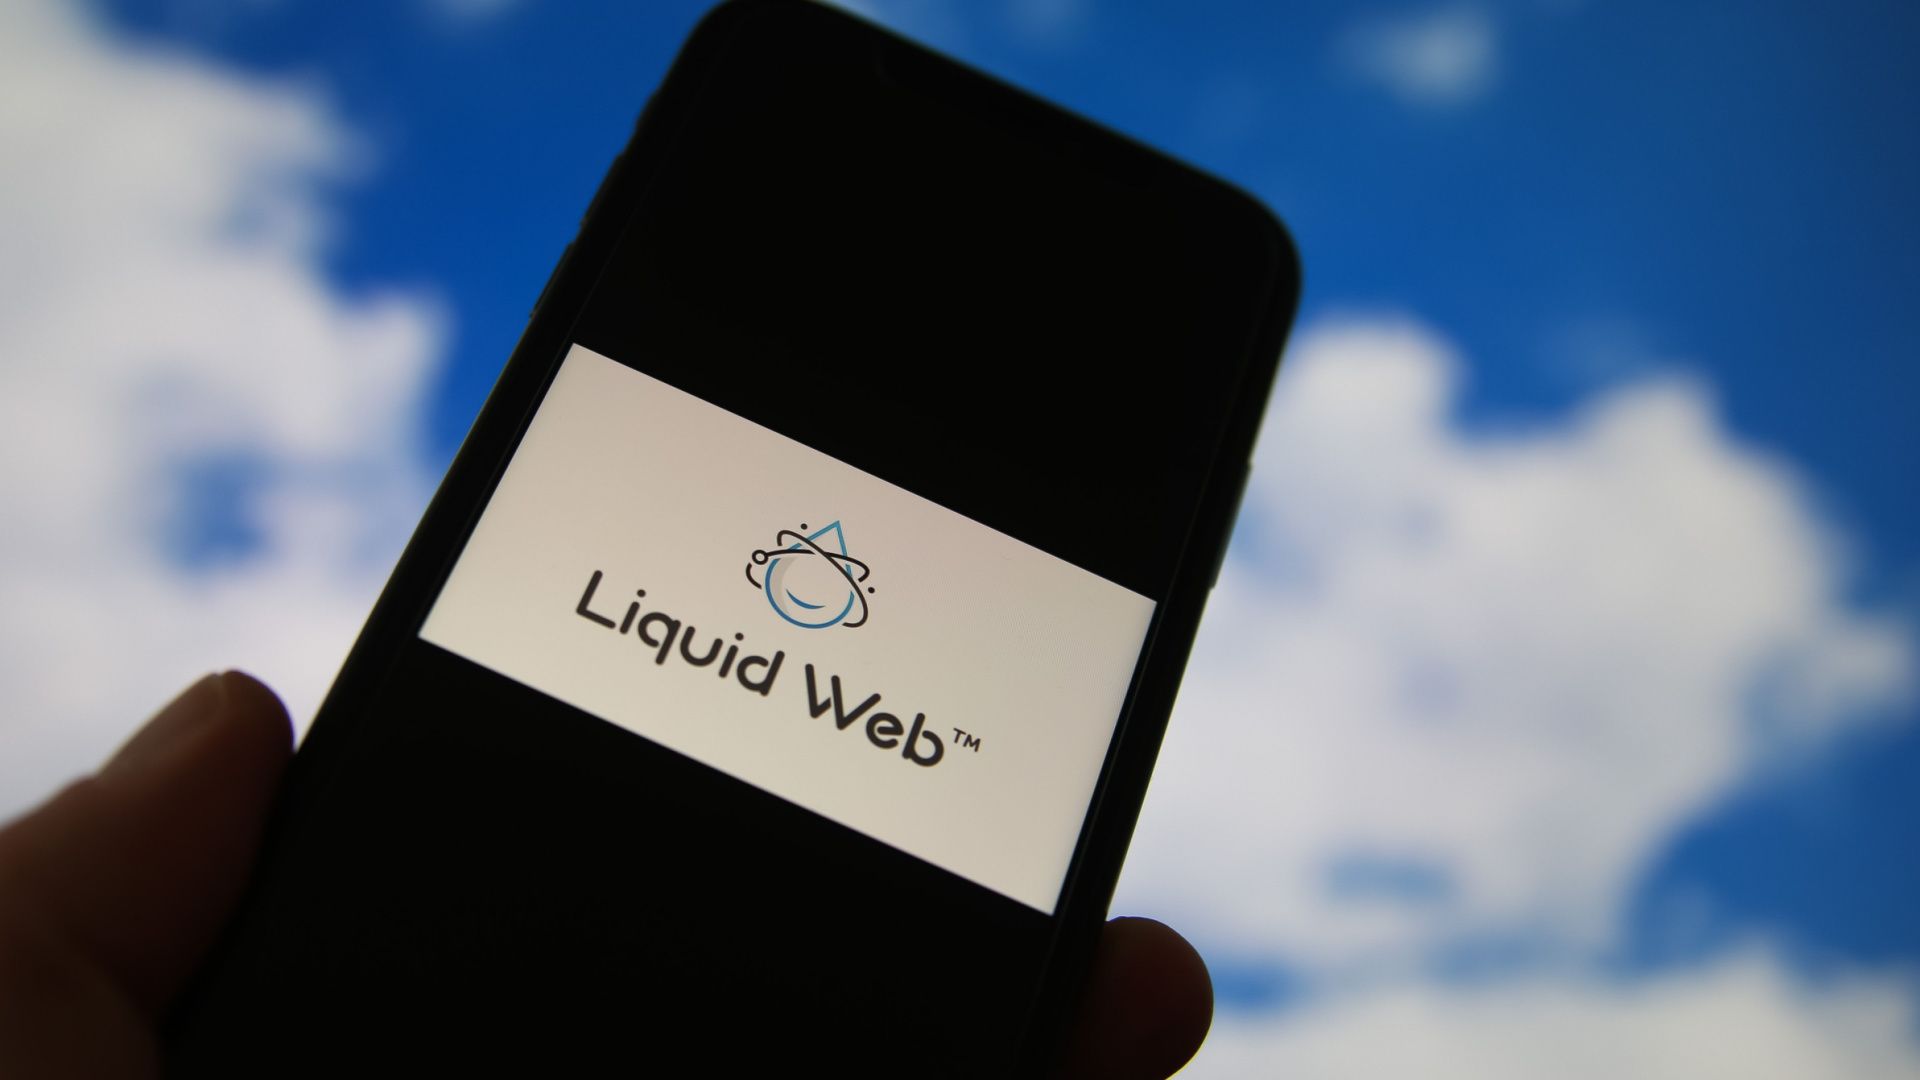 Closeup of smartphone with logo lettering of cloud computing provider service liquid web